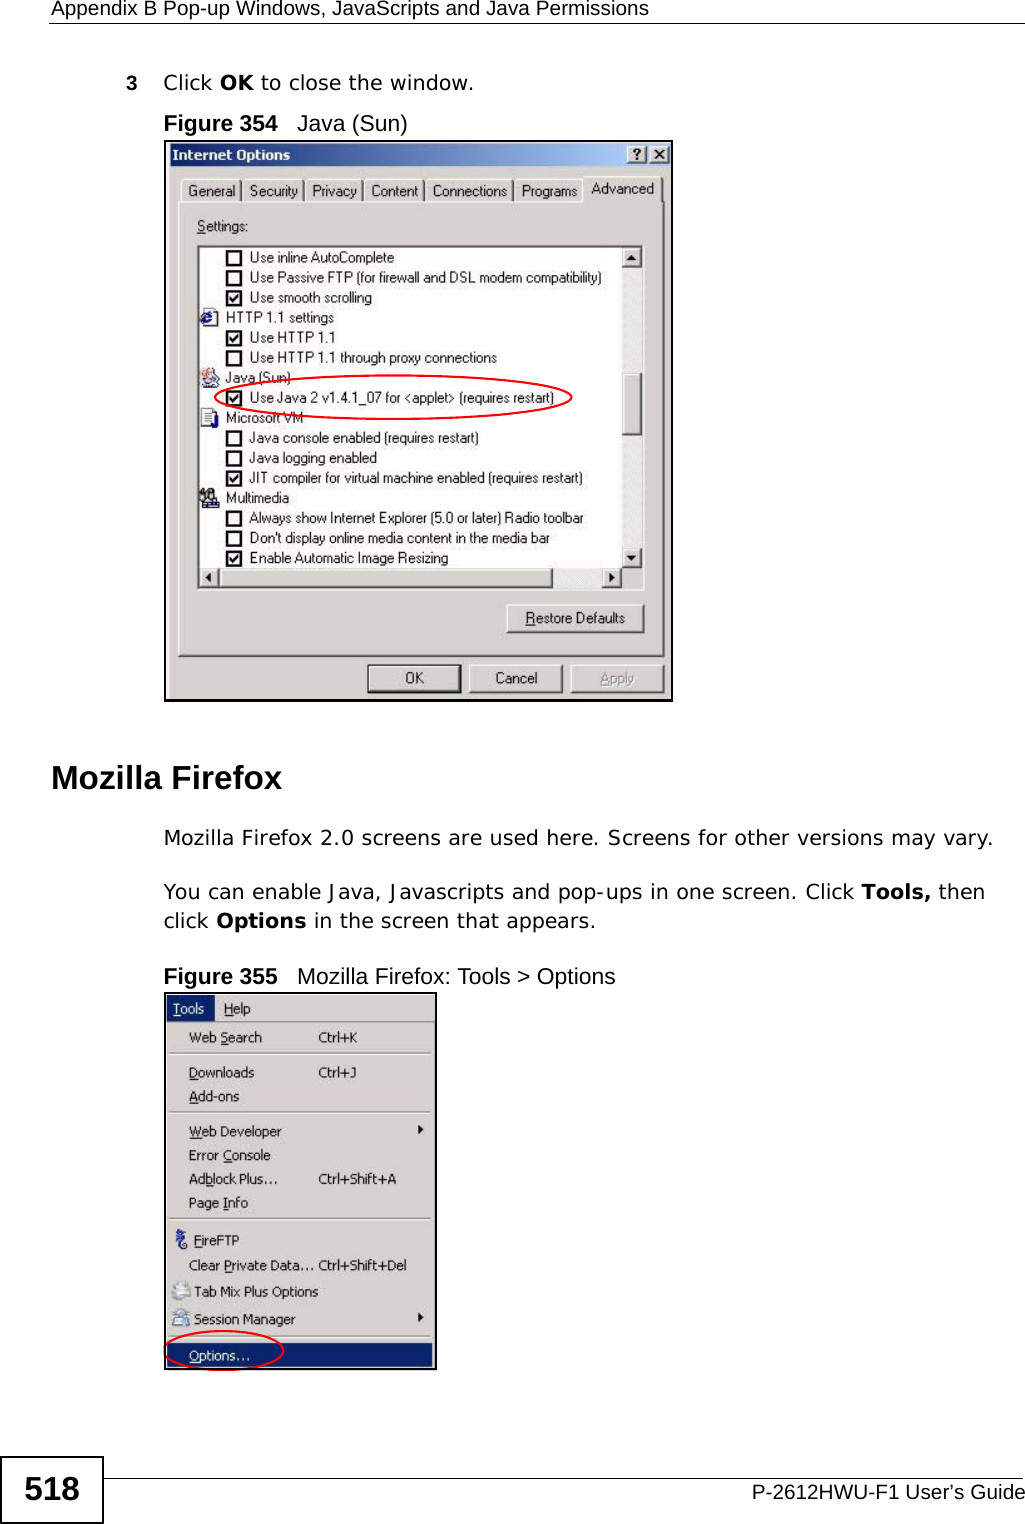 Appendix B Pop-up Windows, JavaScripts and Java PermissionsP-2612HWU-F1 User’s Guide5183Click OK to close the window.Figure 354   Java (Sun)Mozilla FirefoxMozilla Firefox 2.0 screens are used here. Screens for other versions may vary. You can enable Java, Javascripts and pop-ups in one screen. Click Tools, then click Options in the screen that appears.Figure 355   Mozilla Firefox: Tools &gt; Options